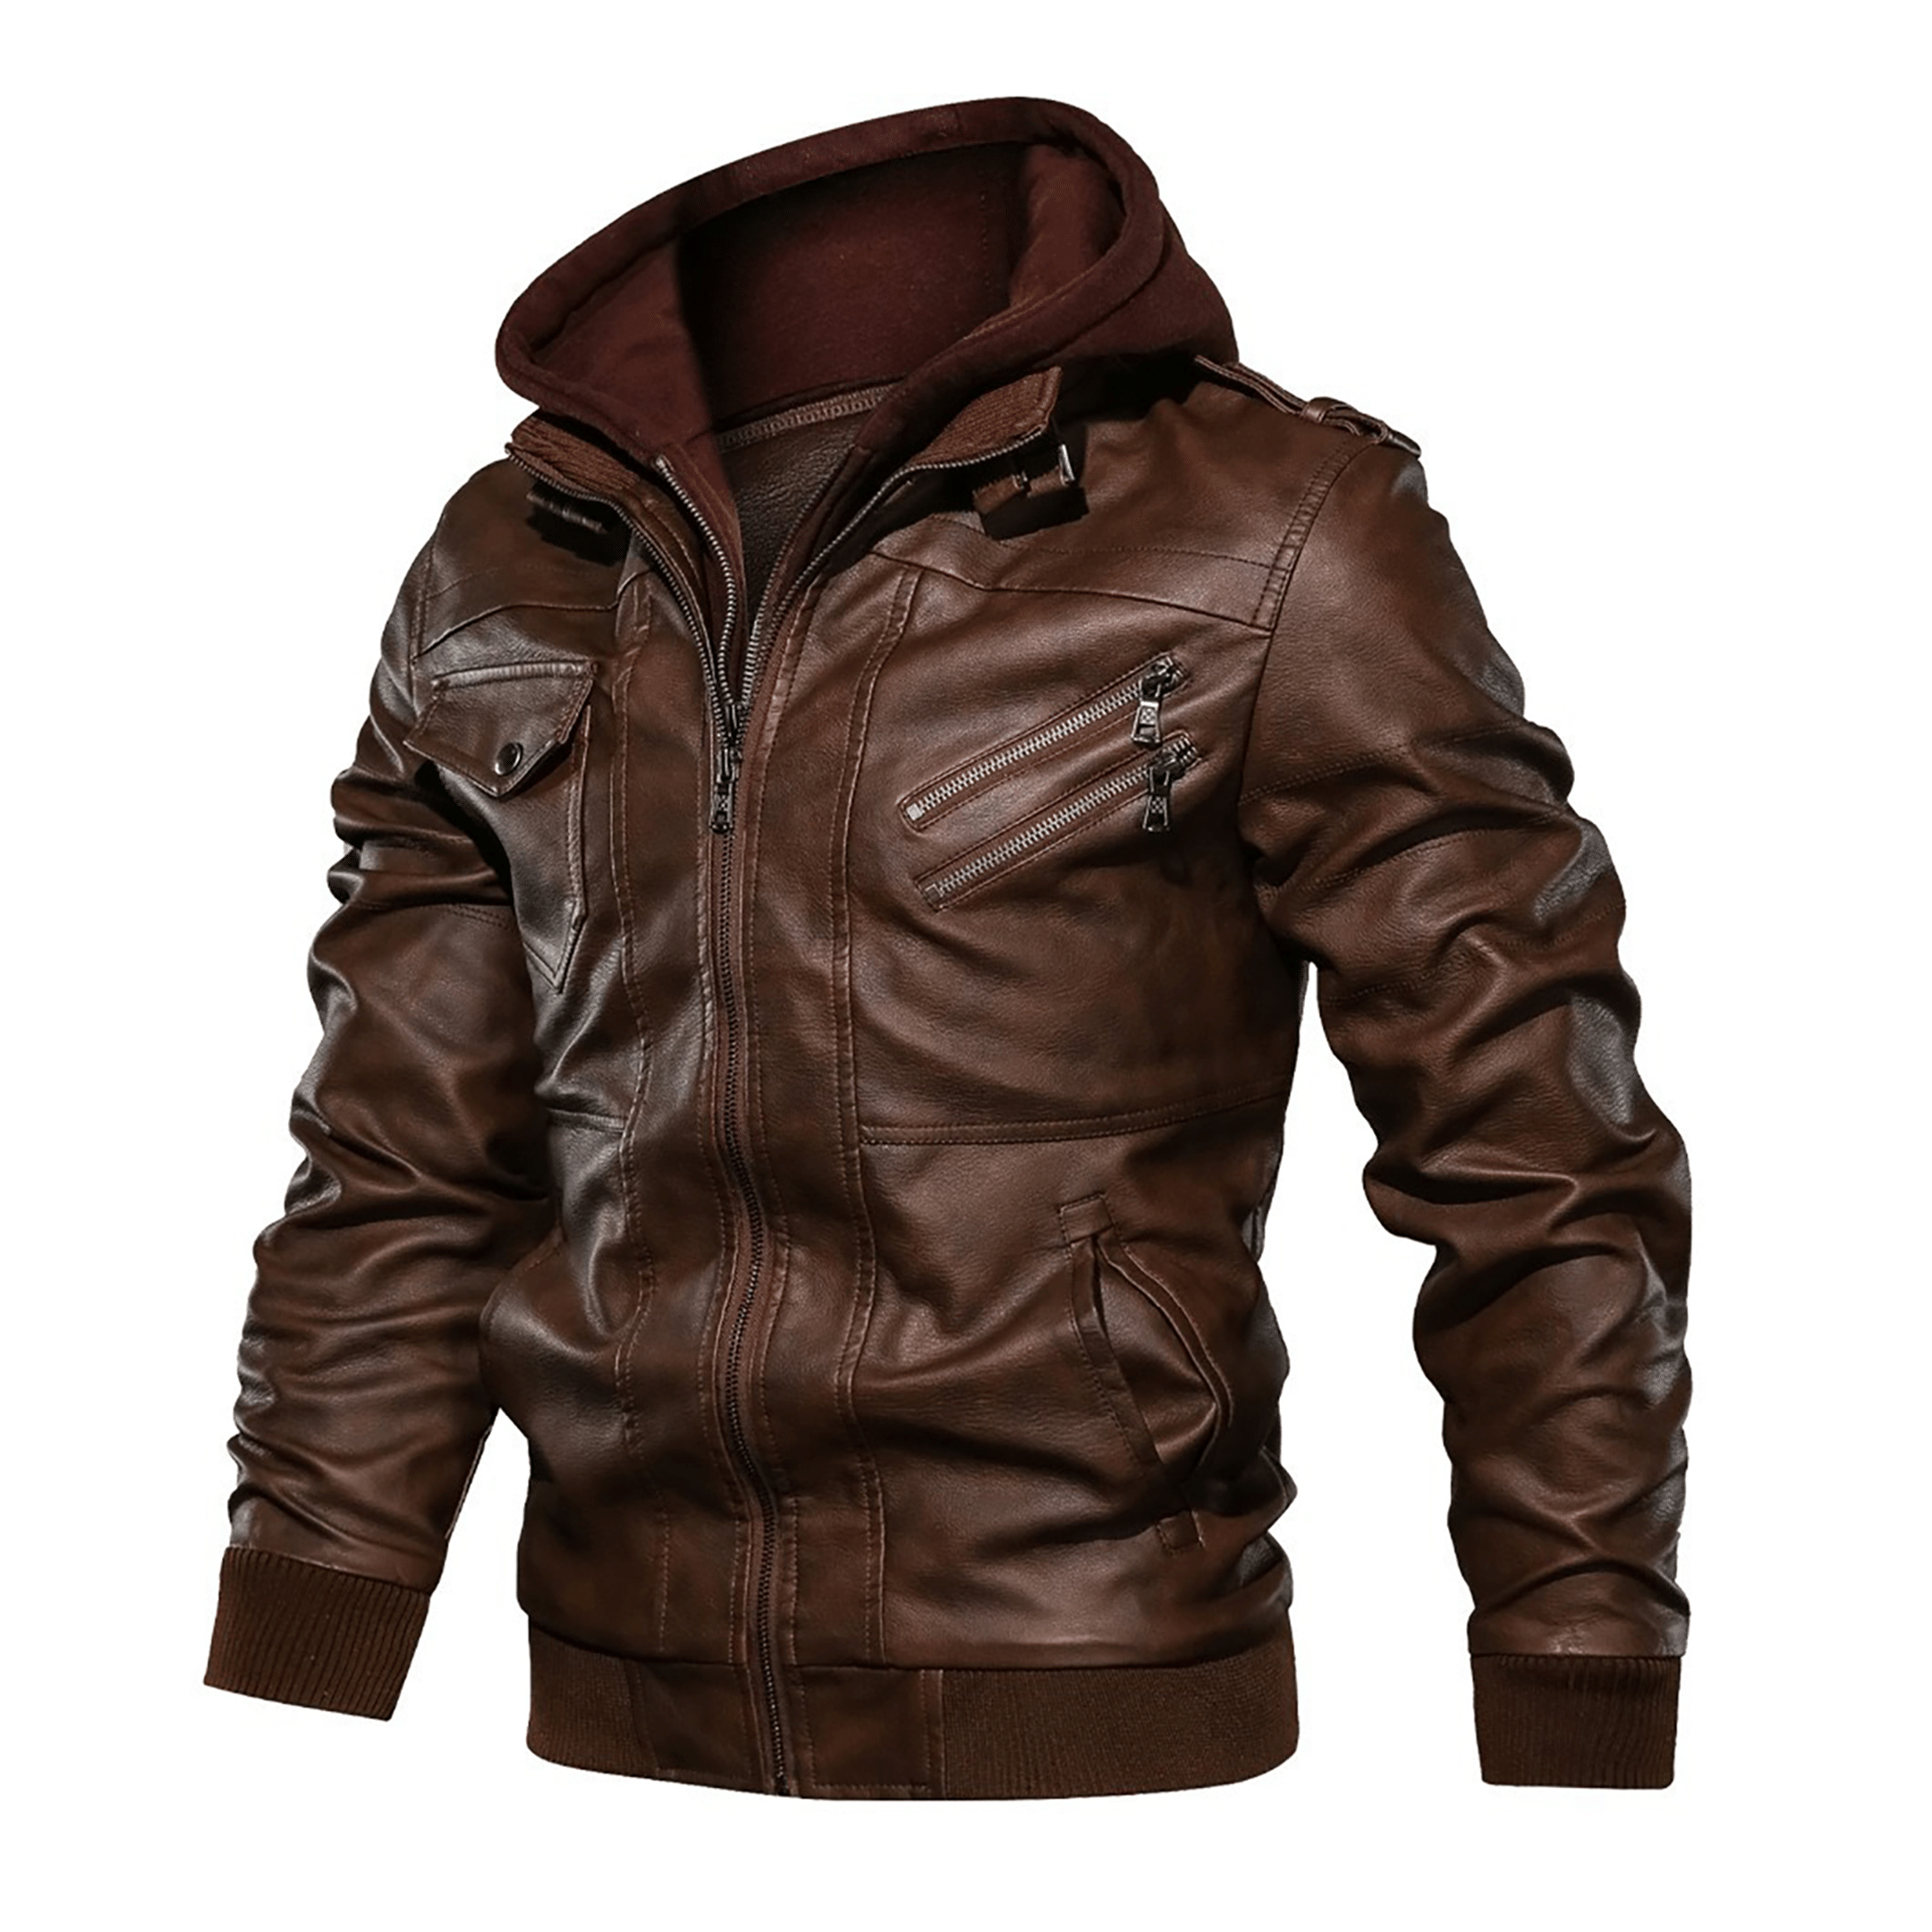 Top leather jackets and latest products 345